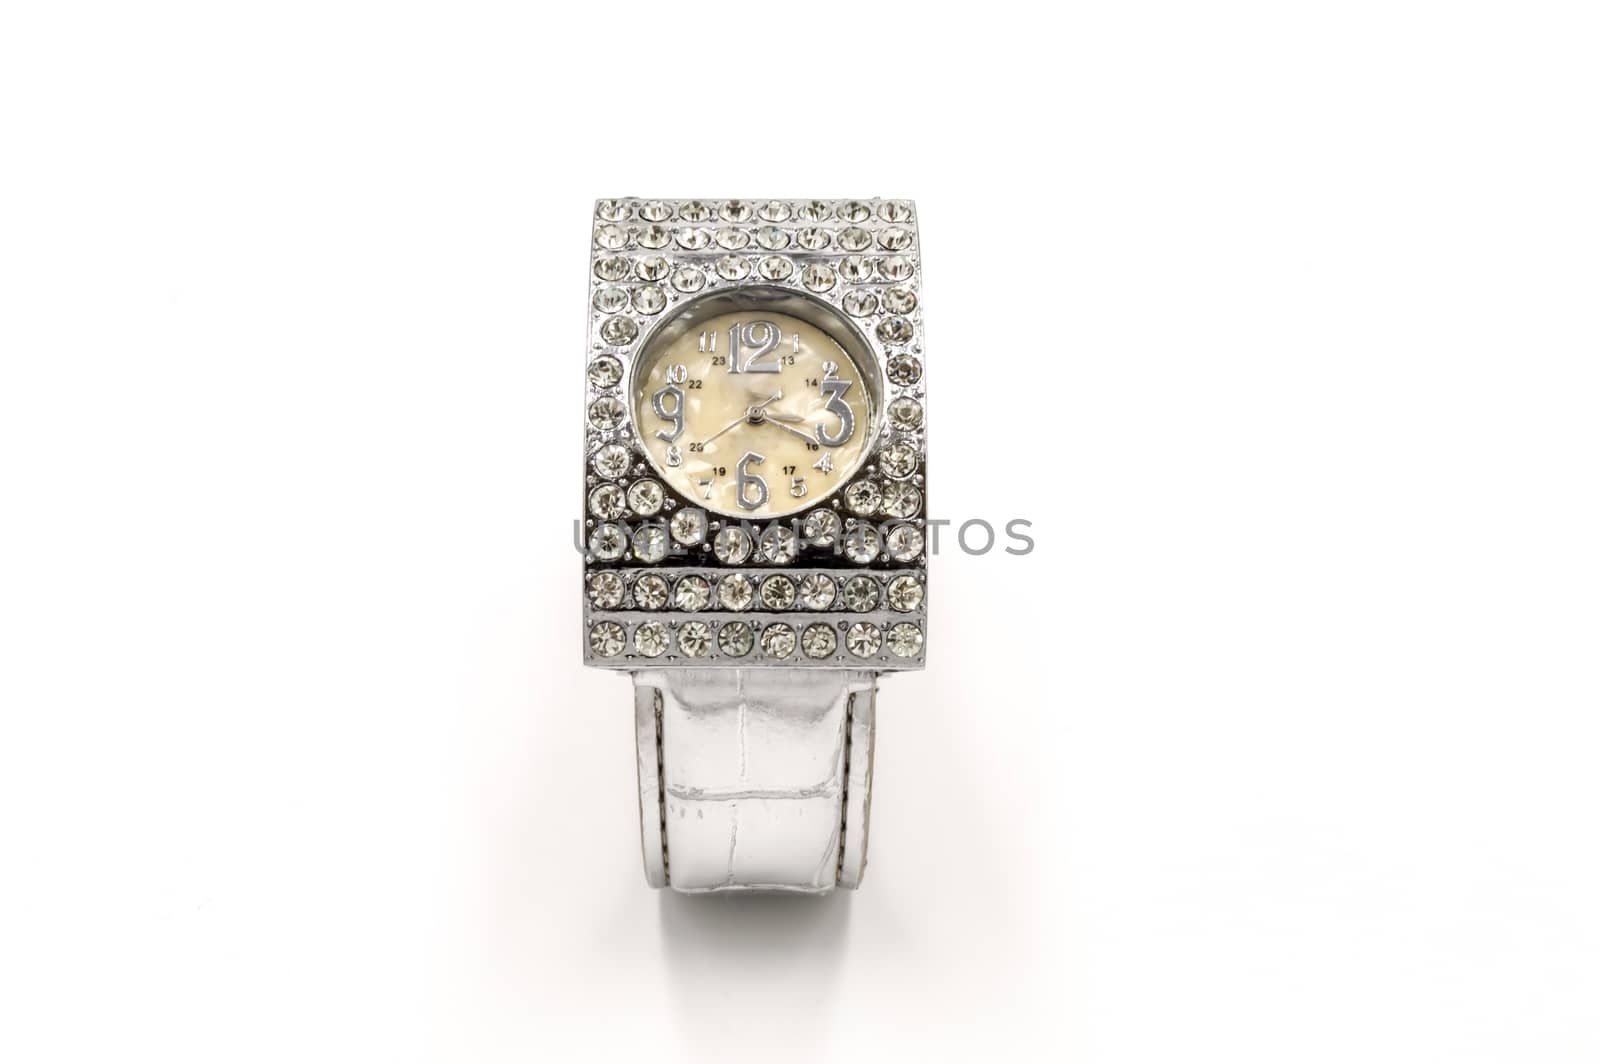 Silver quartz watch with precious stones on a white background